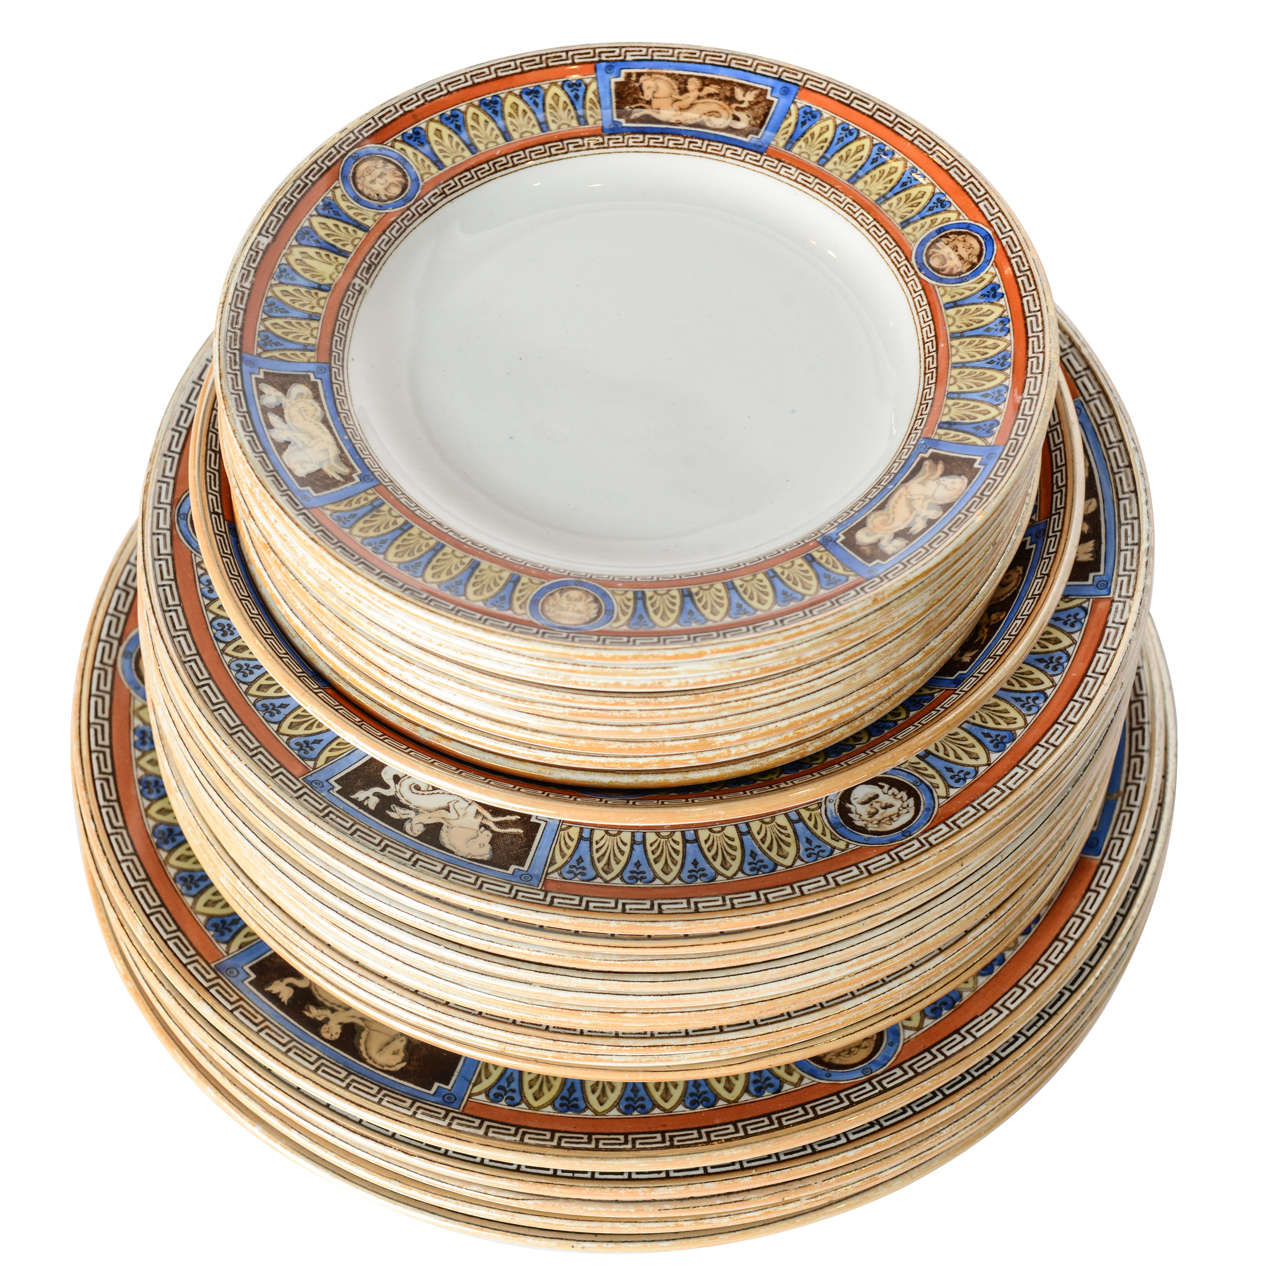 Partial Dinner Service of Mintons Dinnerware, 19th Century